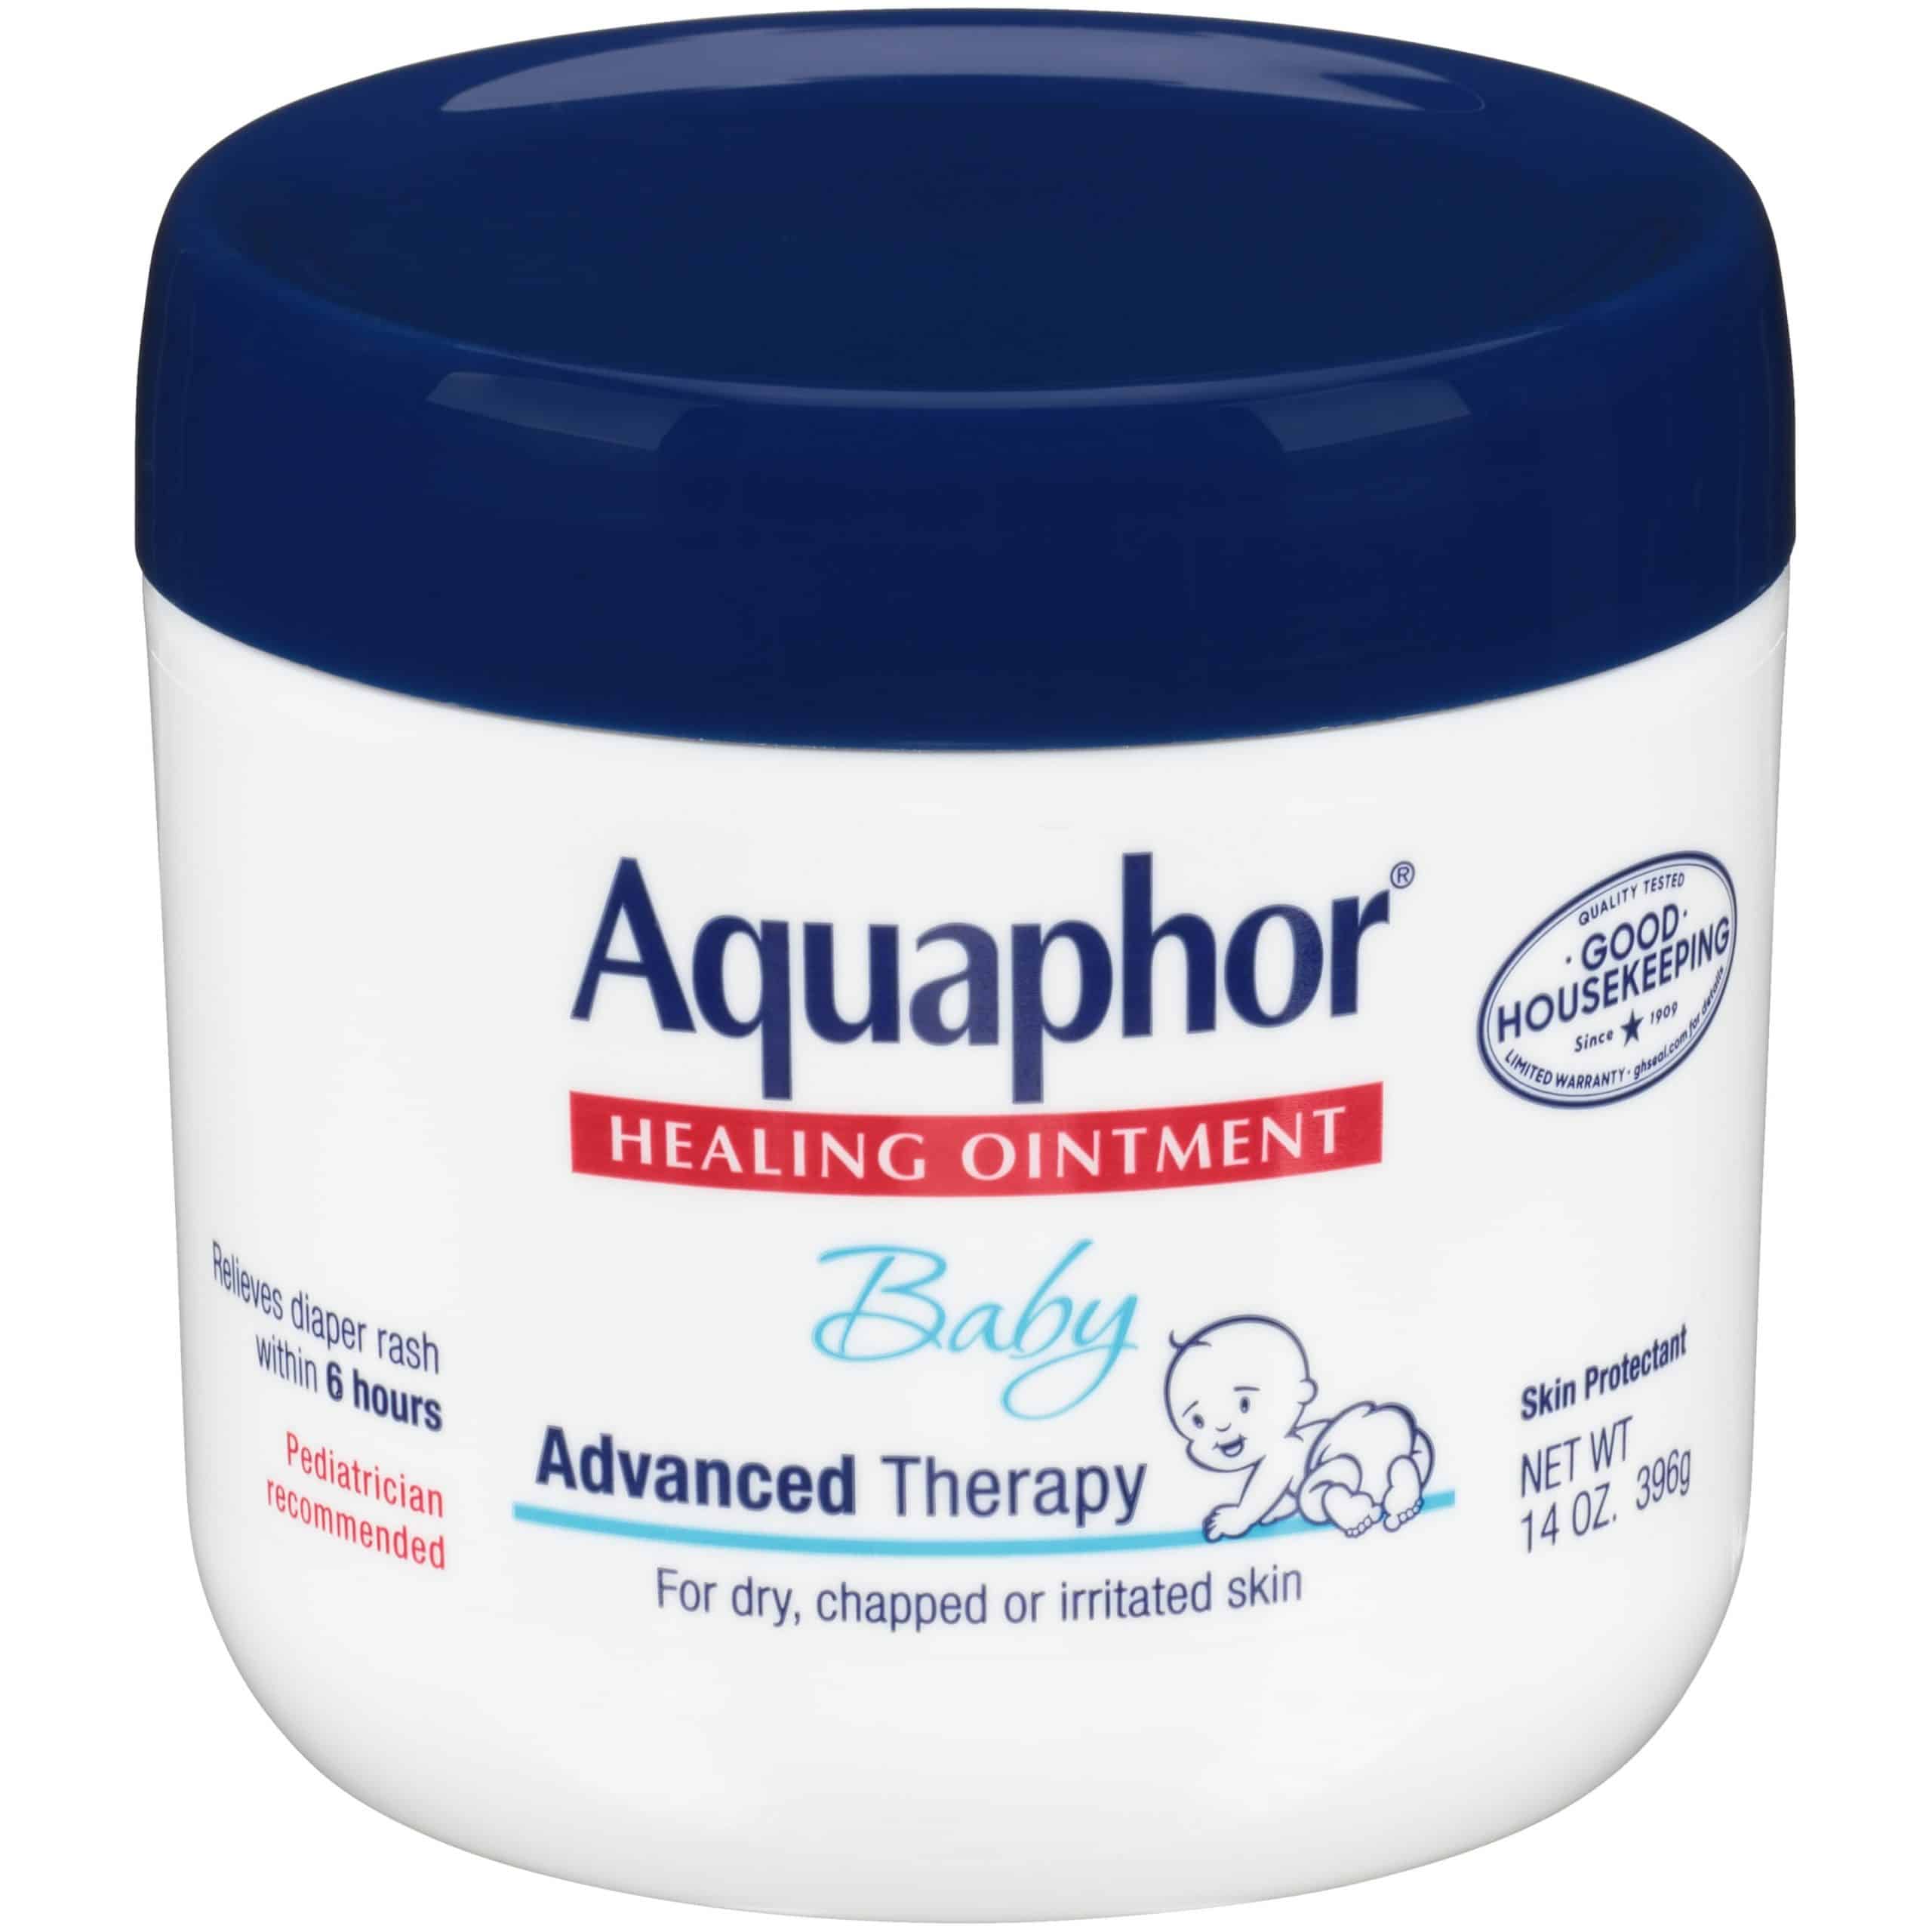 Aquaphor Baby Healing Ointment, Baby Skin Care and Diaper Rash, Large ...